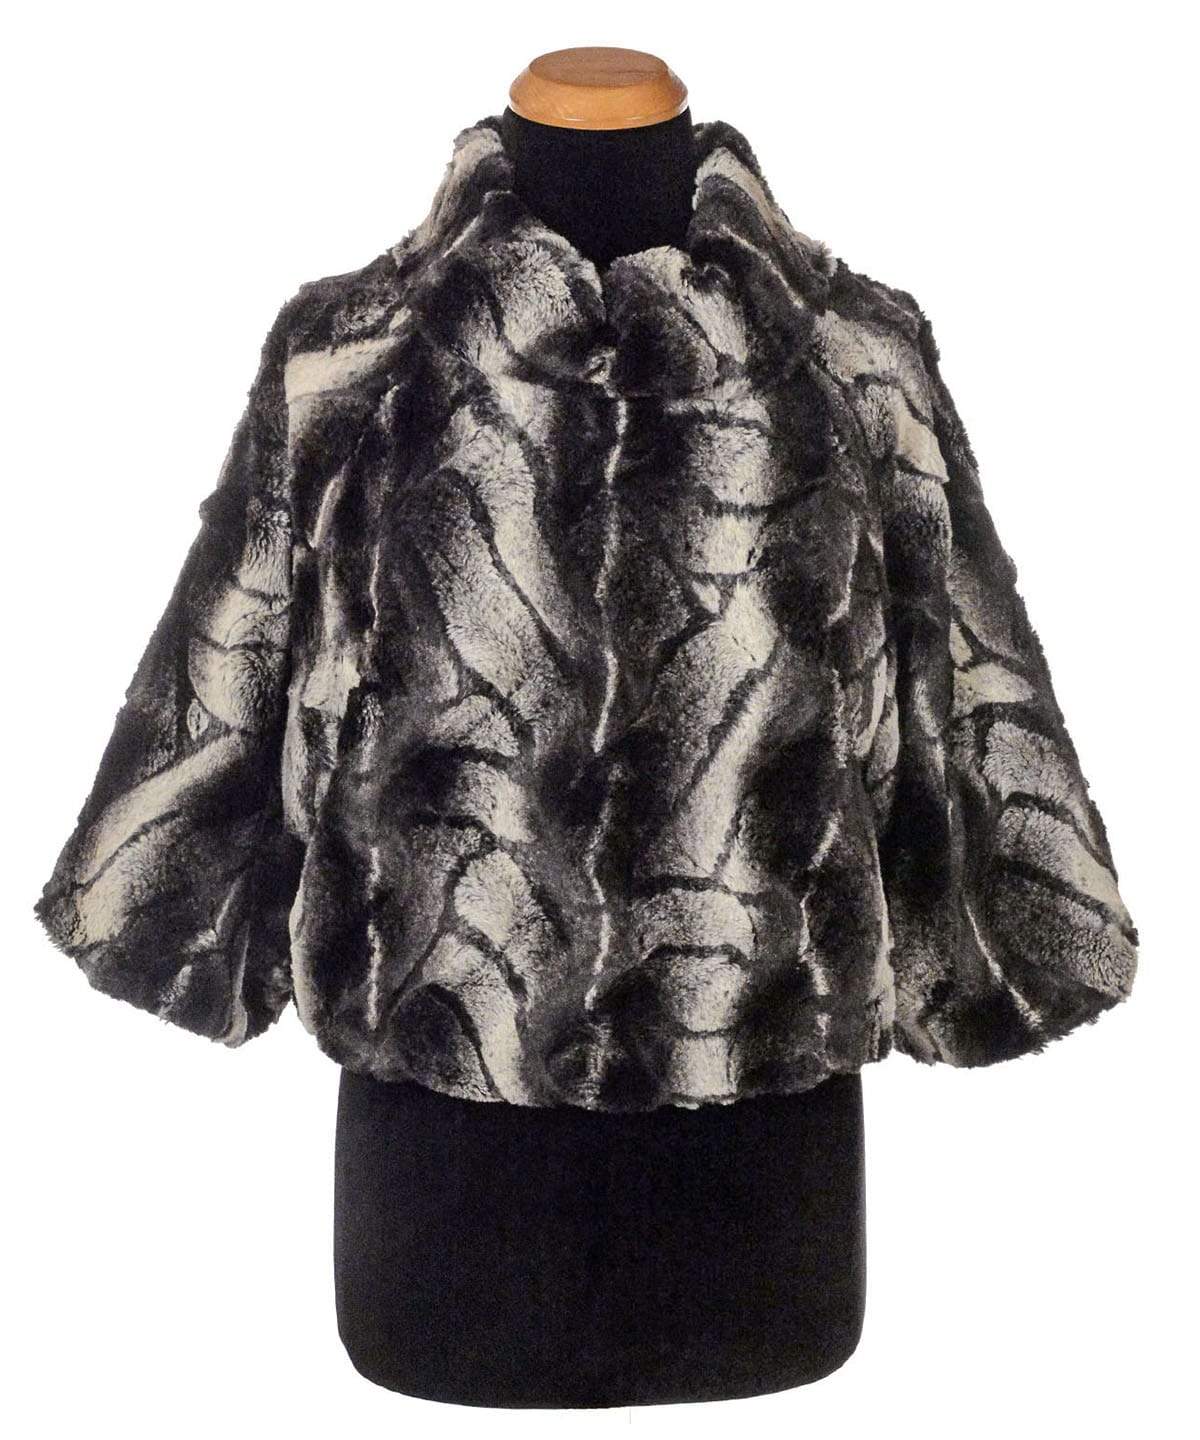 Sweater Top - Luxury Faux Fur in Honey Badger  - Sold Out!